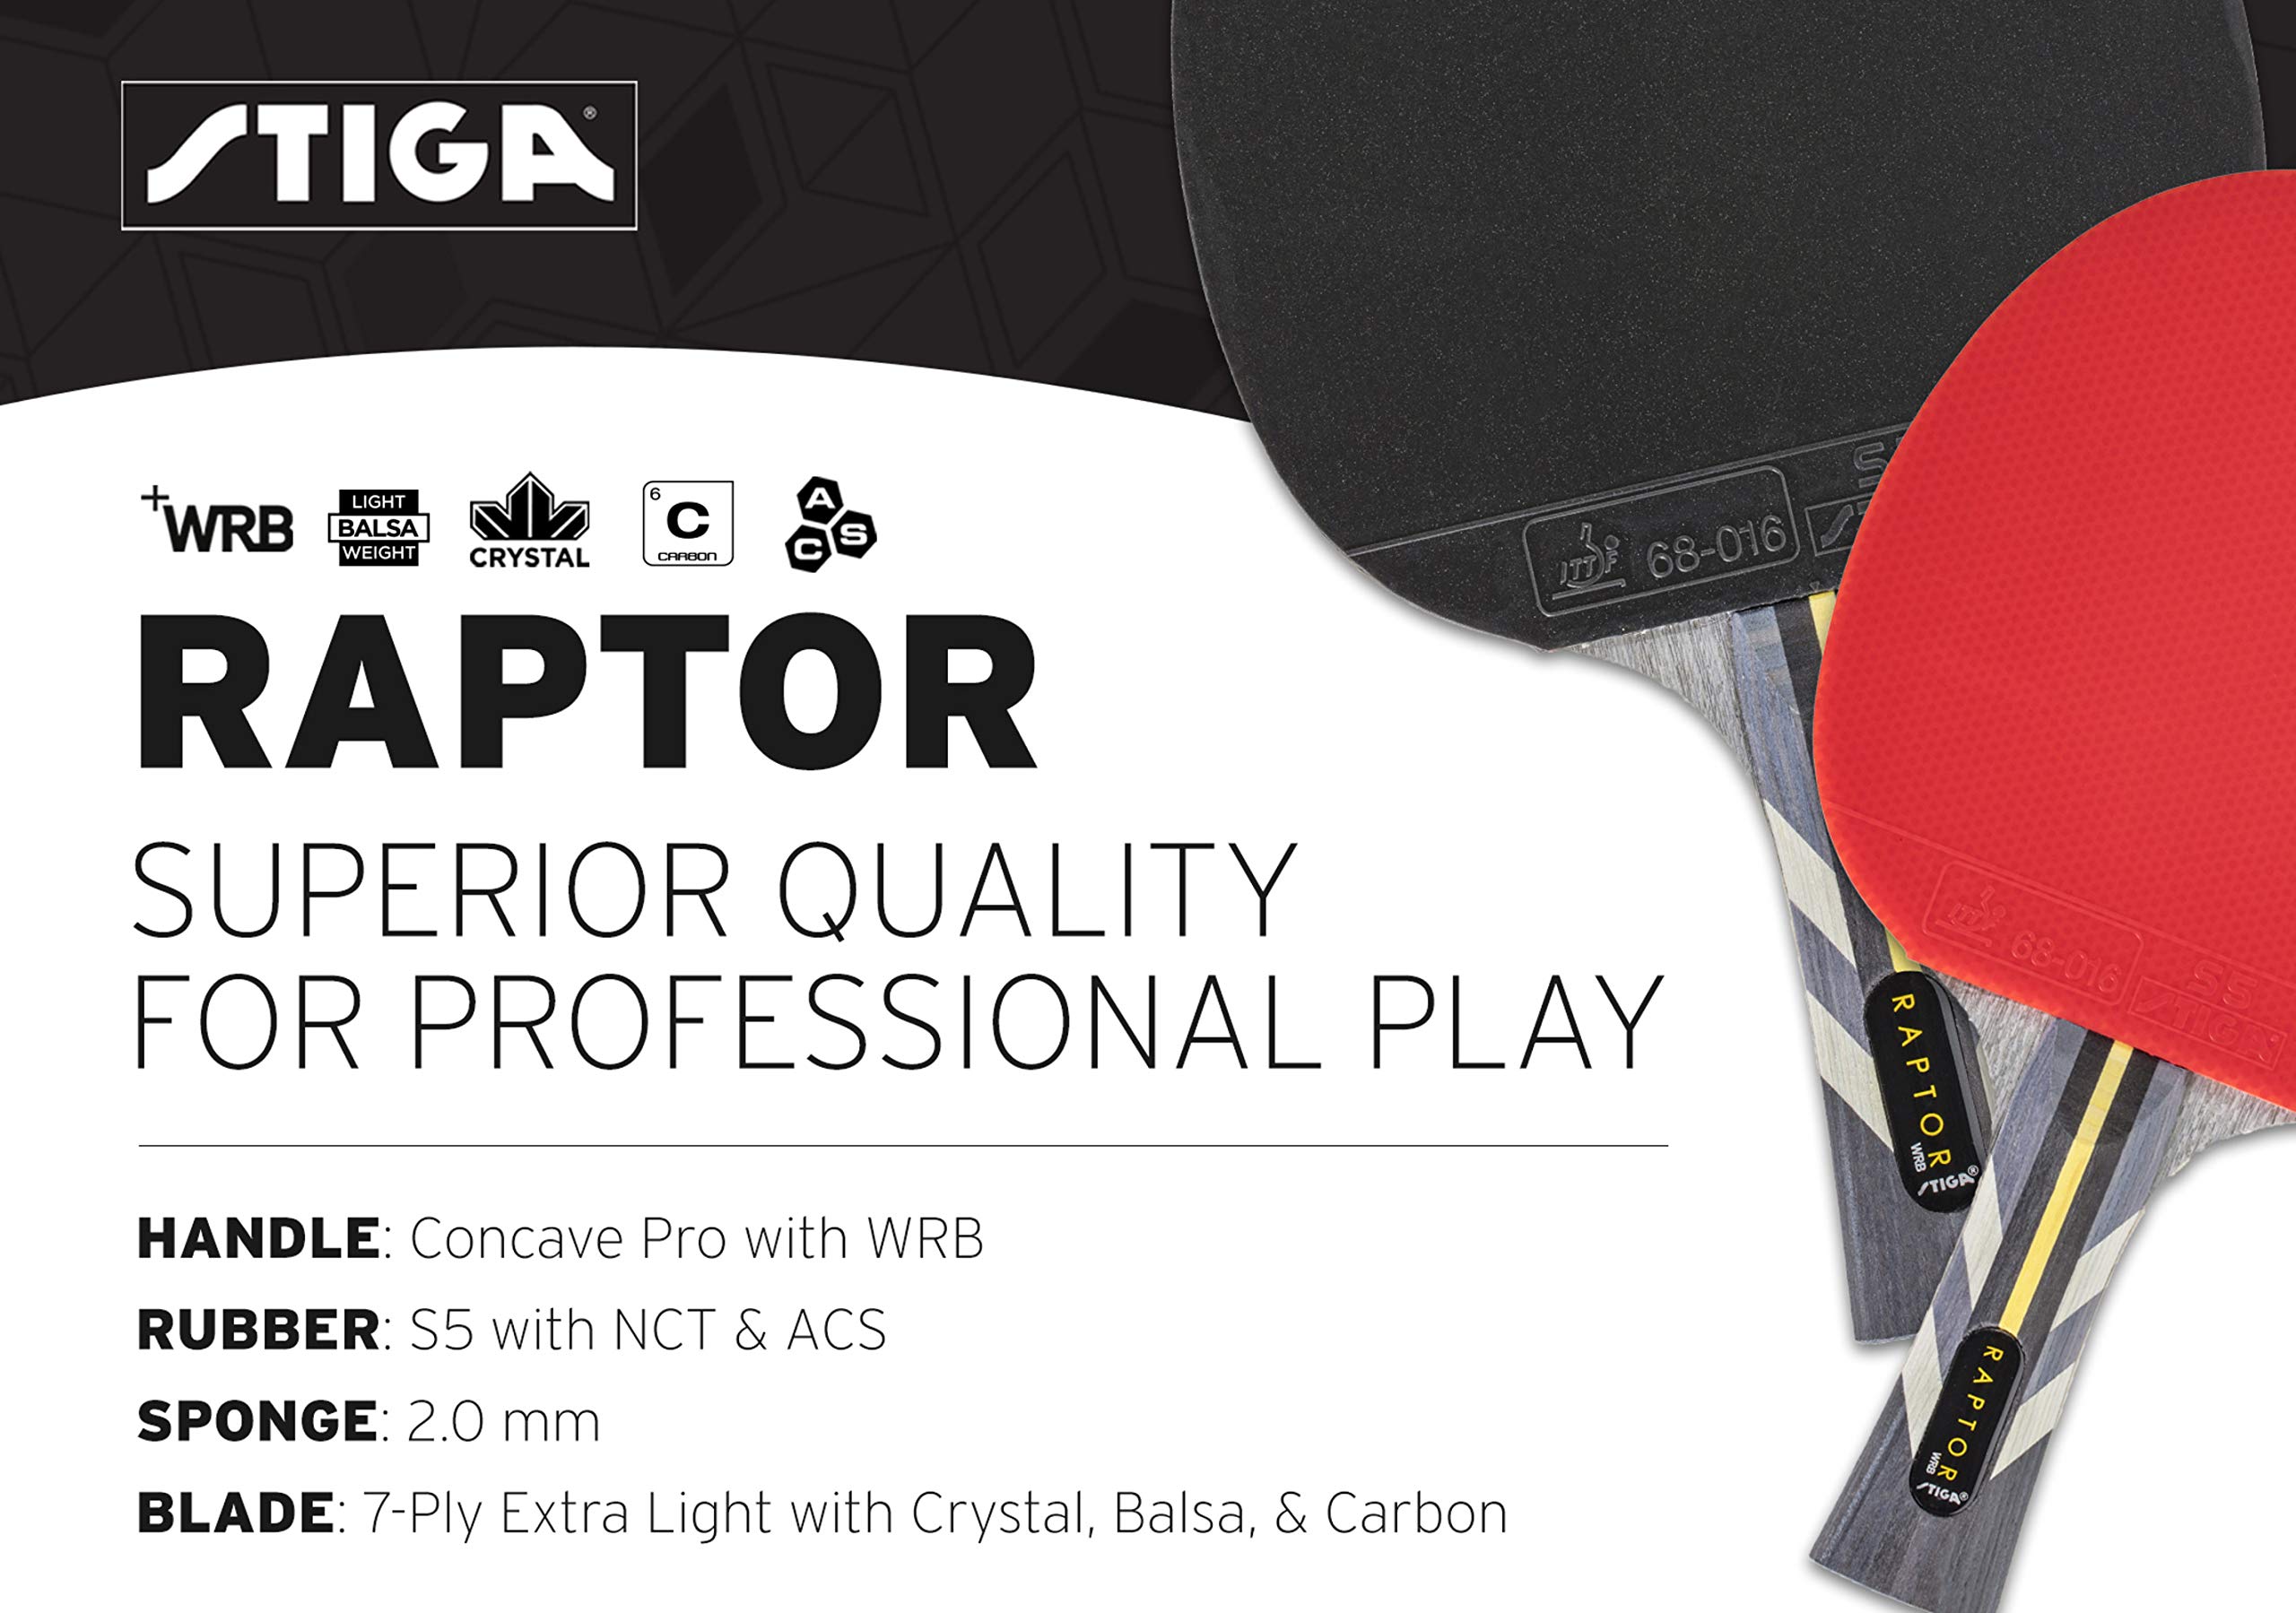 Stiga Raptor 7-Ply Extra Light Carbon/Balsa Ping Pong Paddle NEW IN PACKAGING 